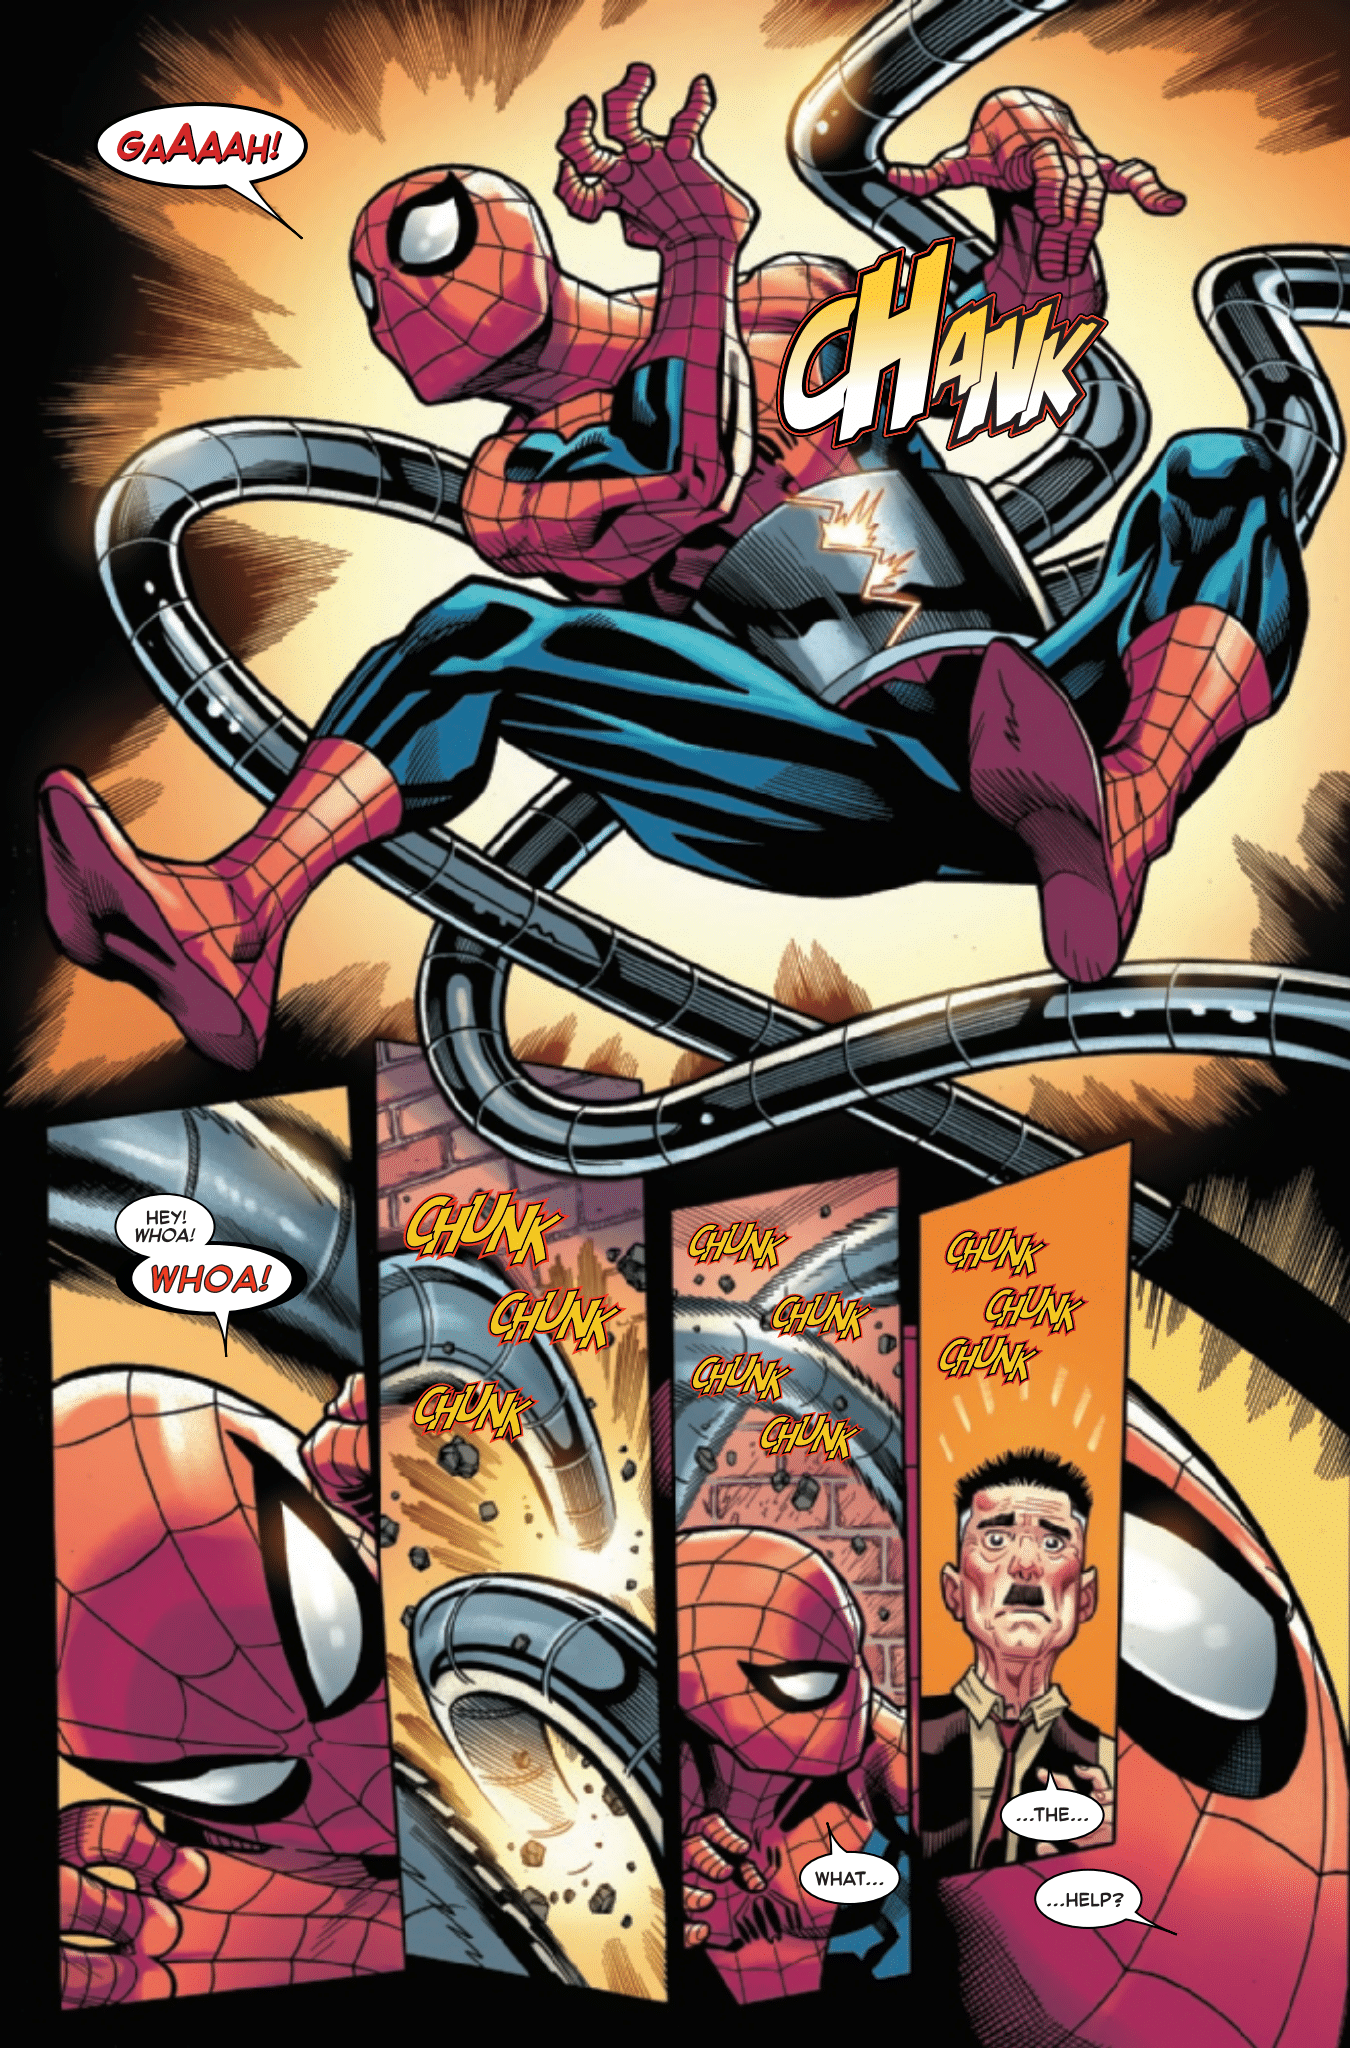 Interior page showcasing an action scene with Spider-Man and Doc Ock arms